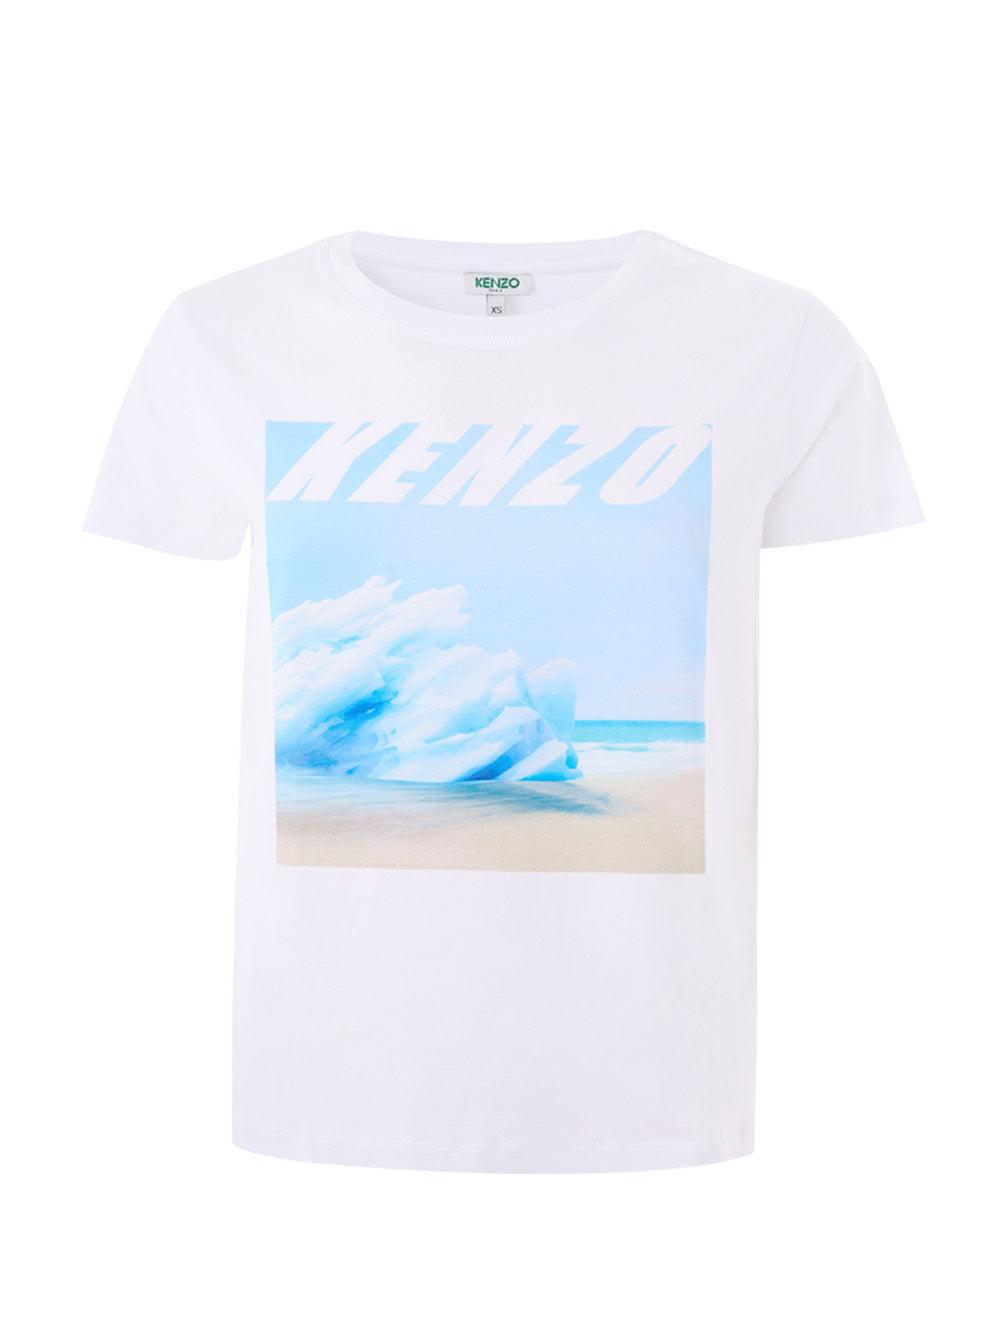 Kenzo White Cotton T-Shirt with Wave Blue Print - Ellie Belle